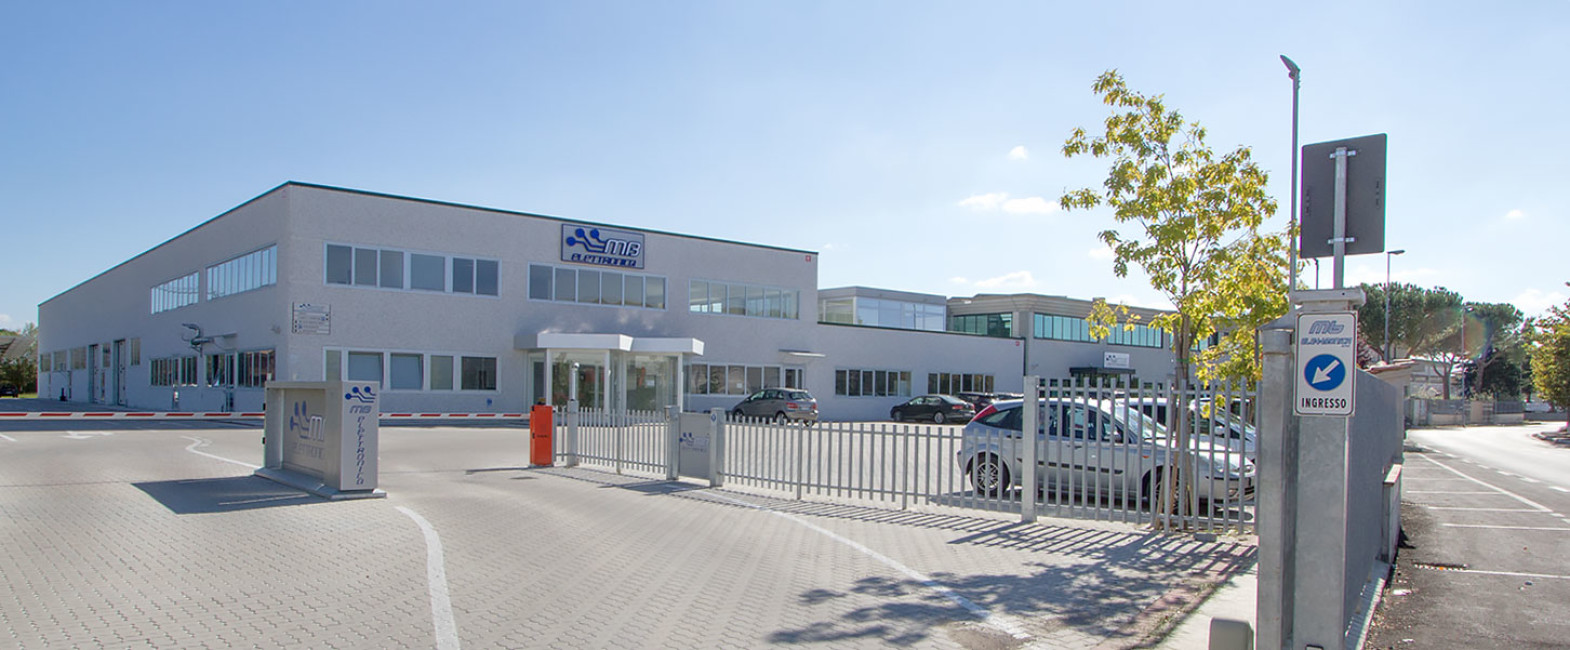 MB Elettronica – Our location